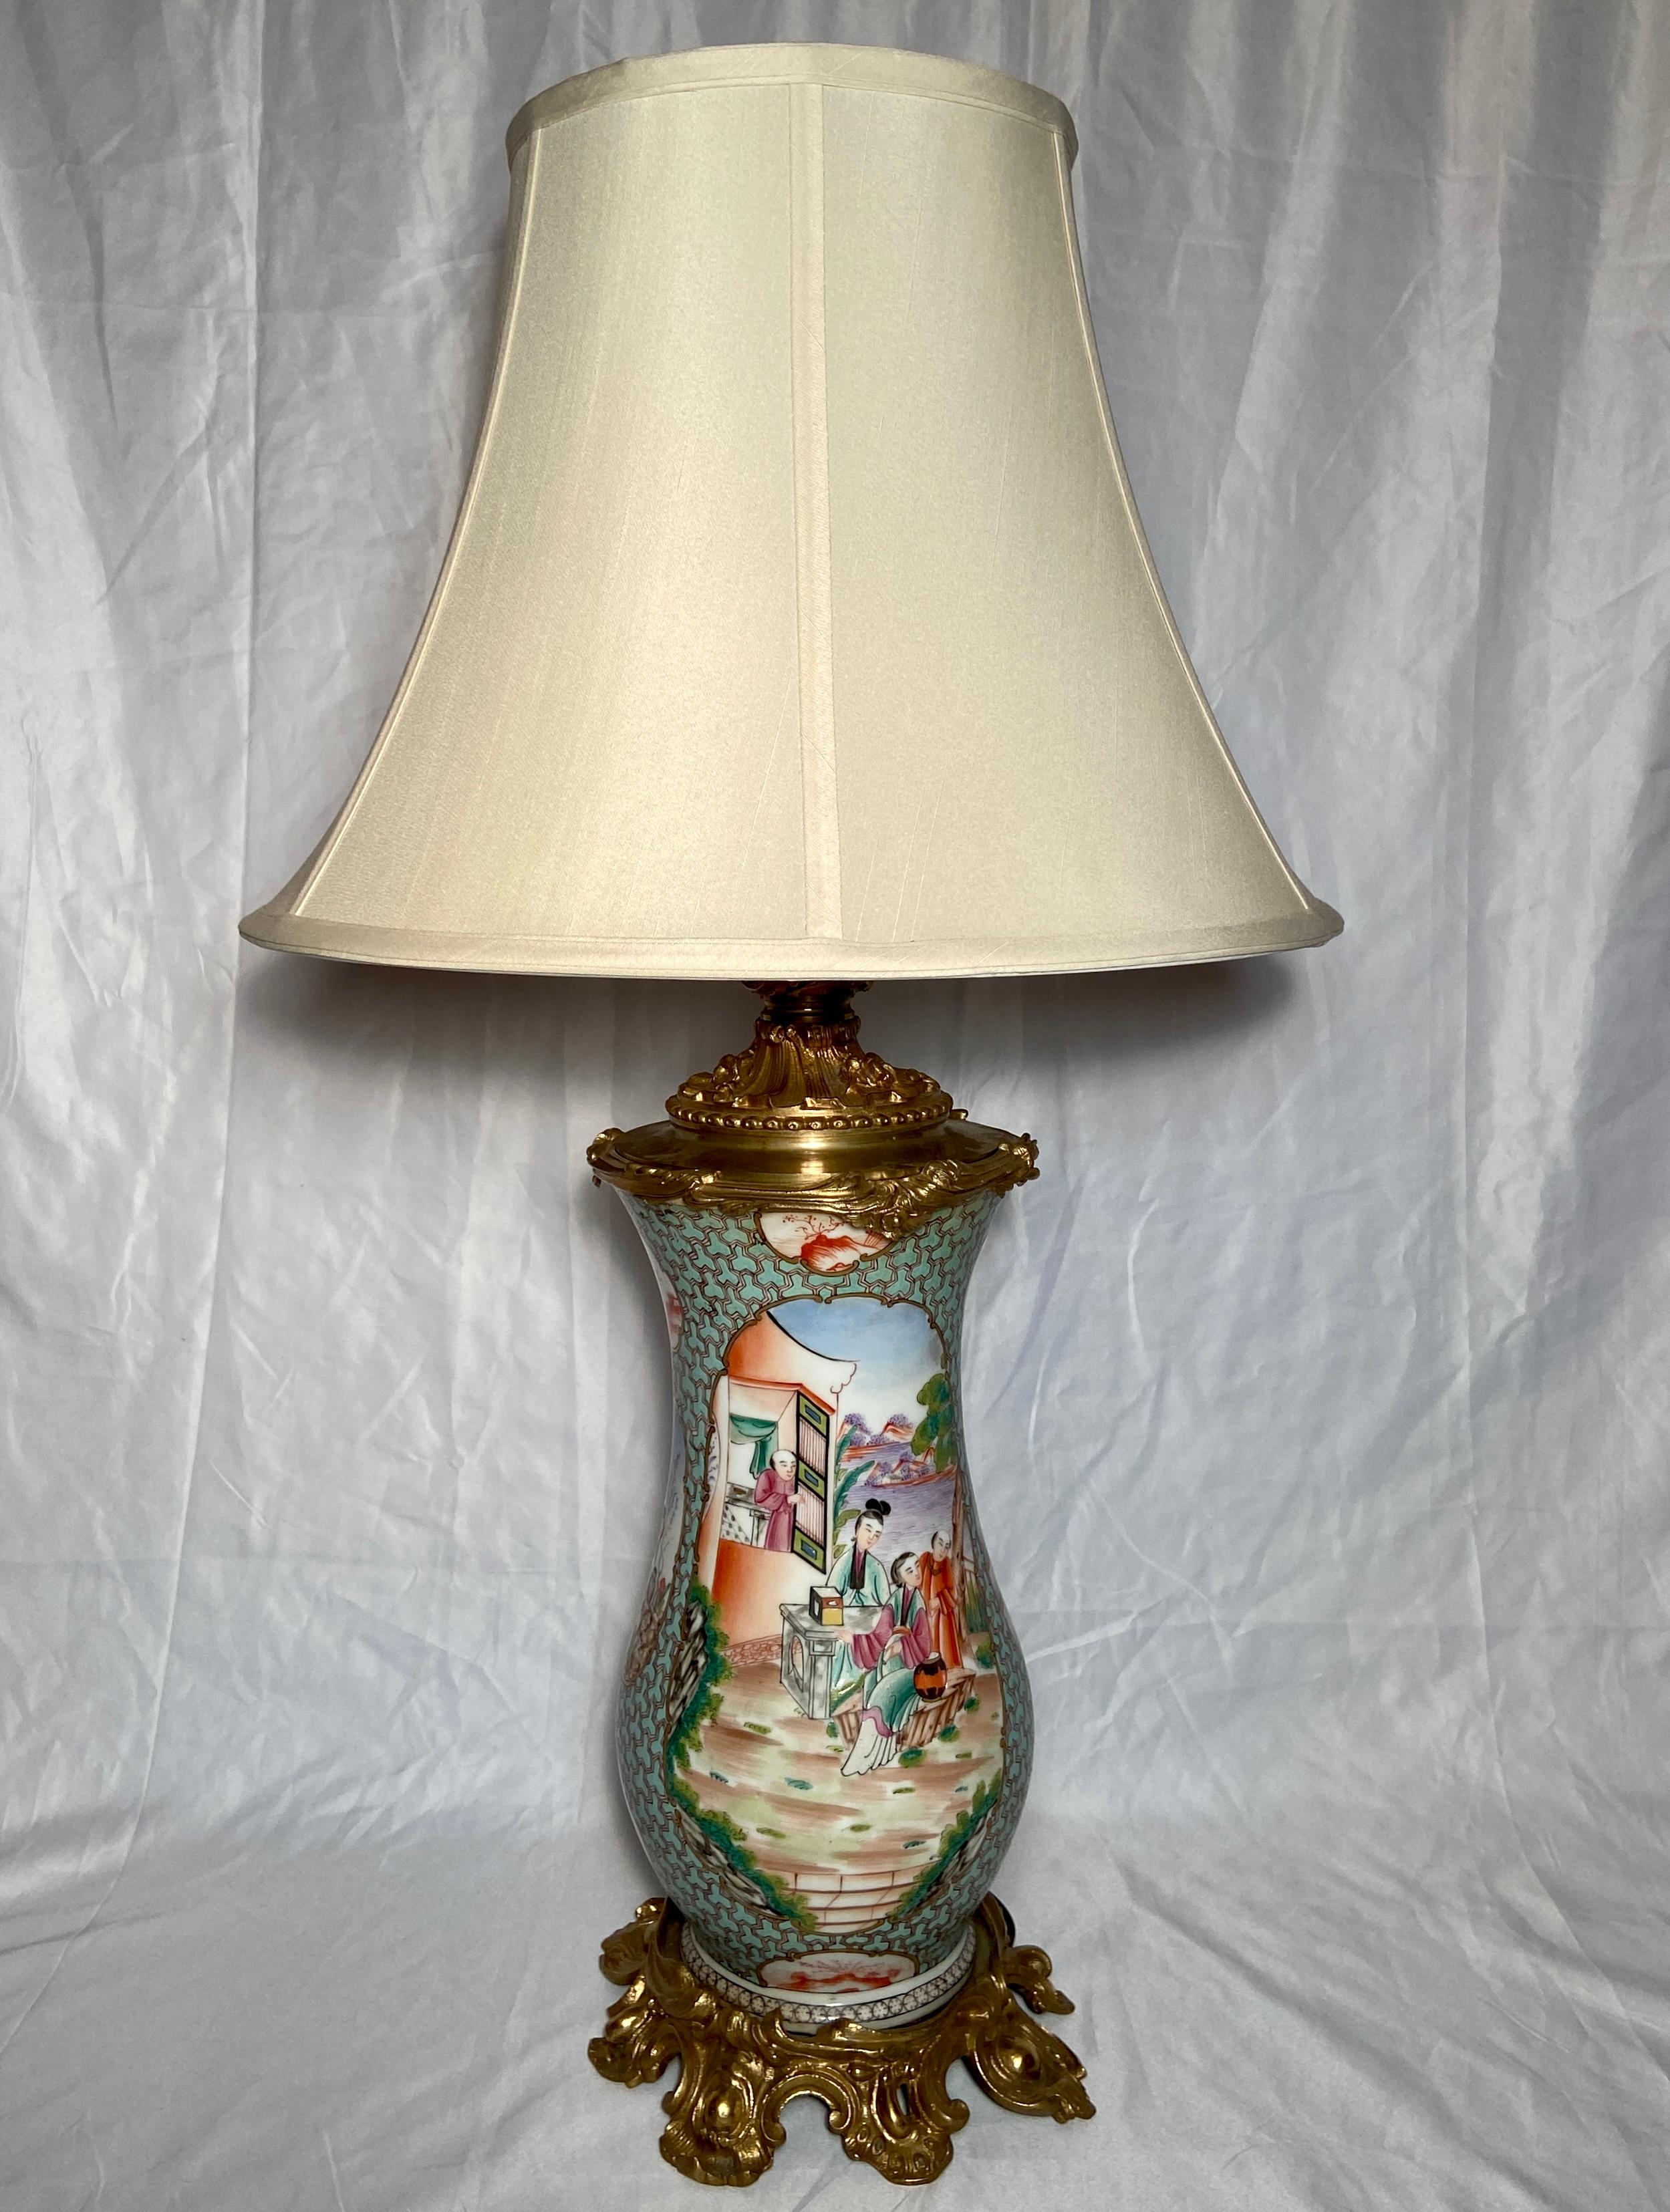 Pair antique 19th century French chinoiserie porcelain and gold bronze lamps. Unusual color porcelain.